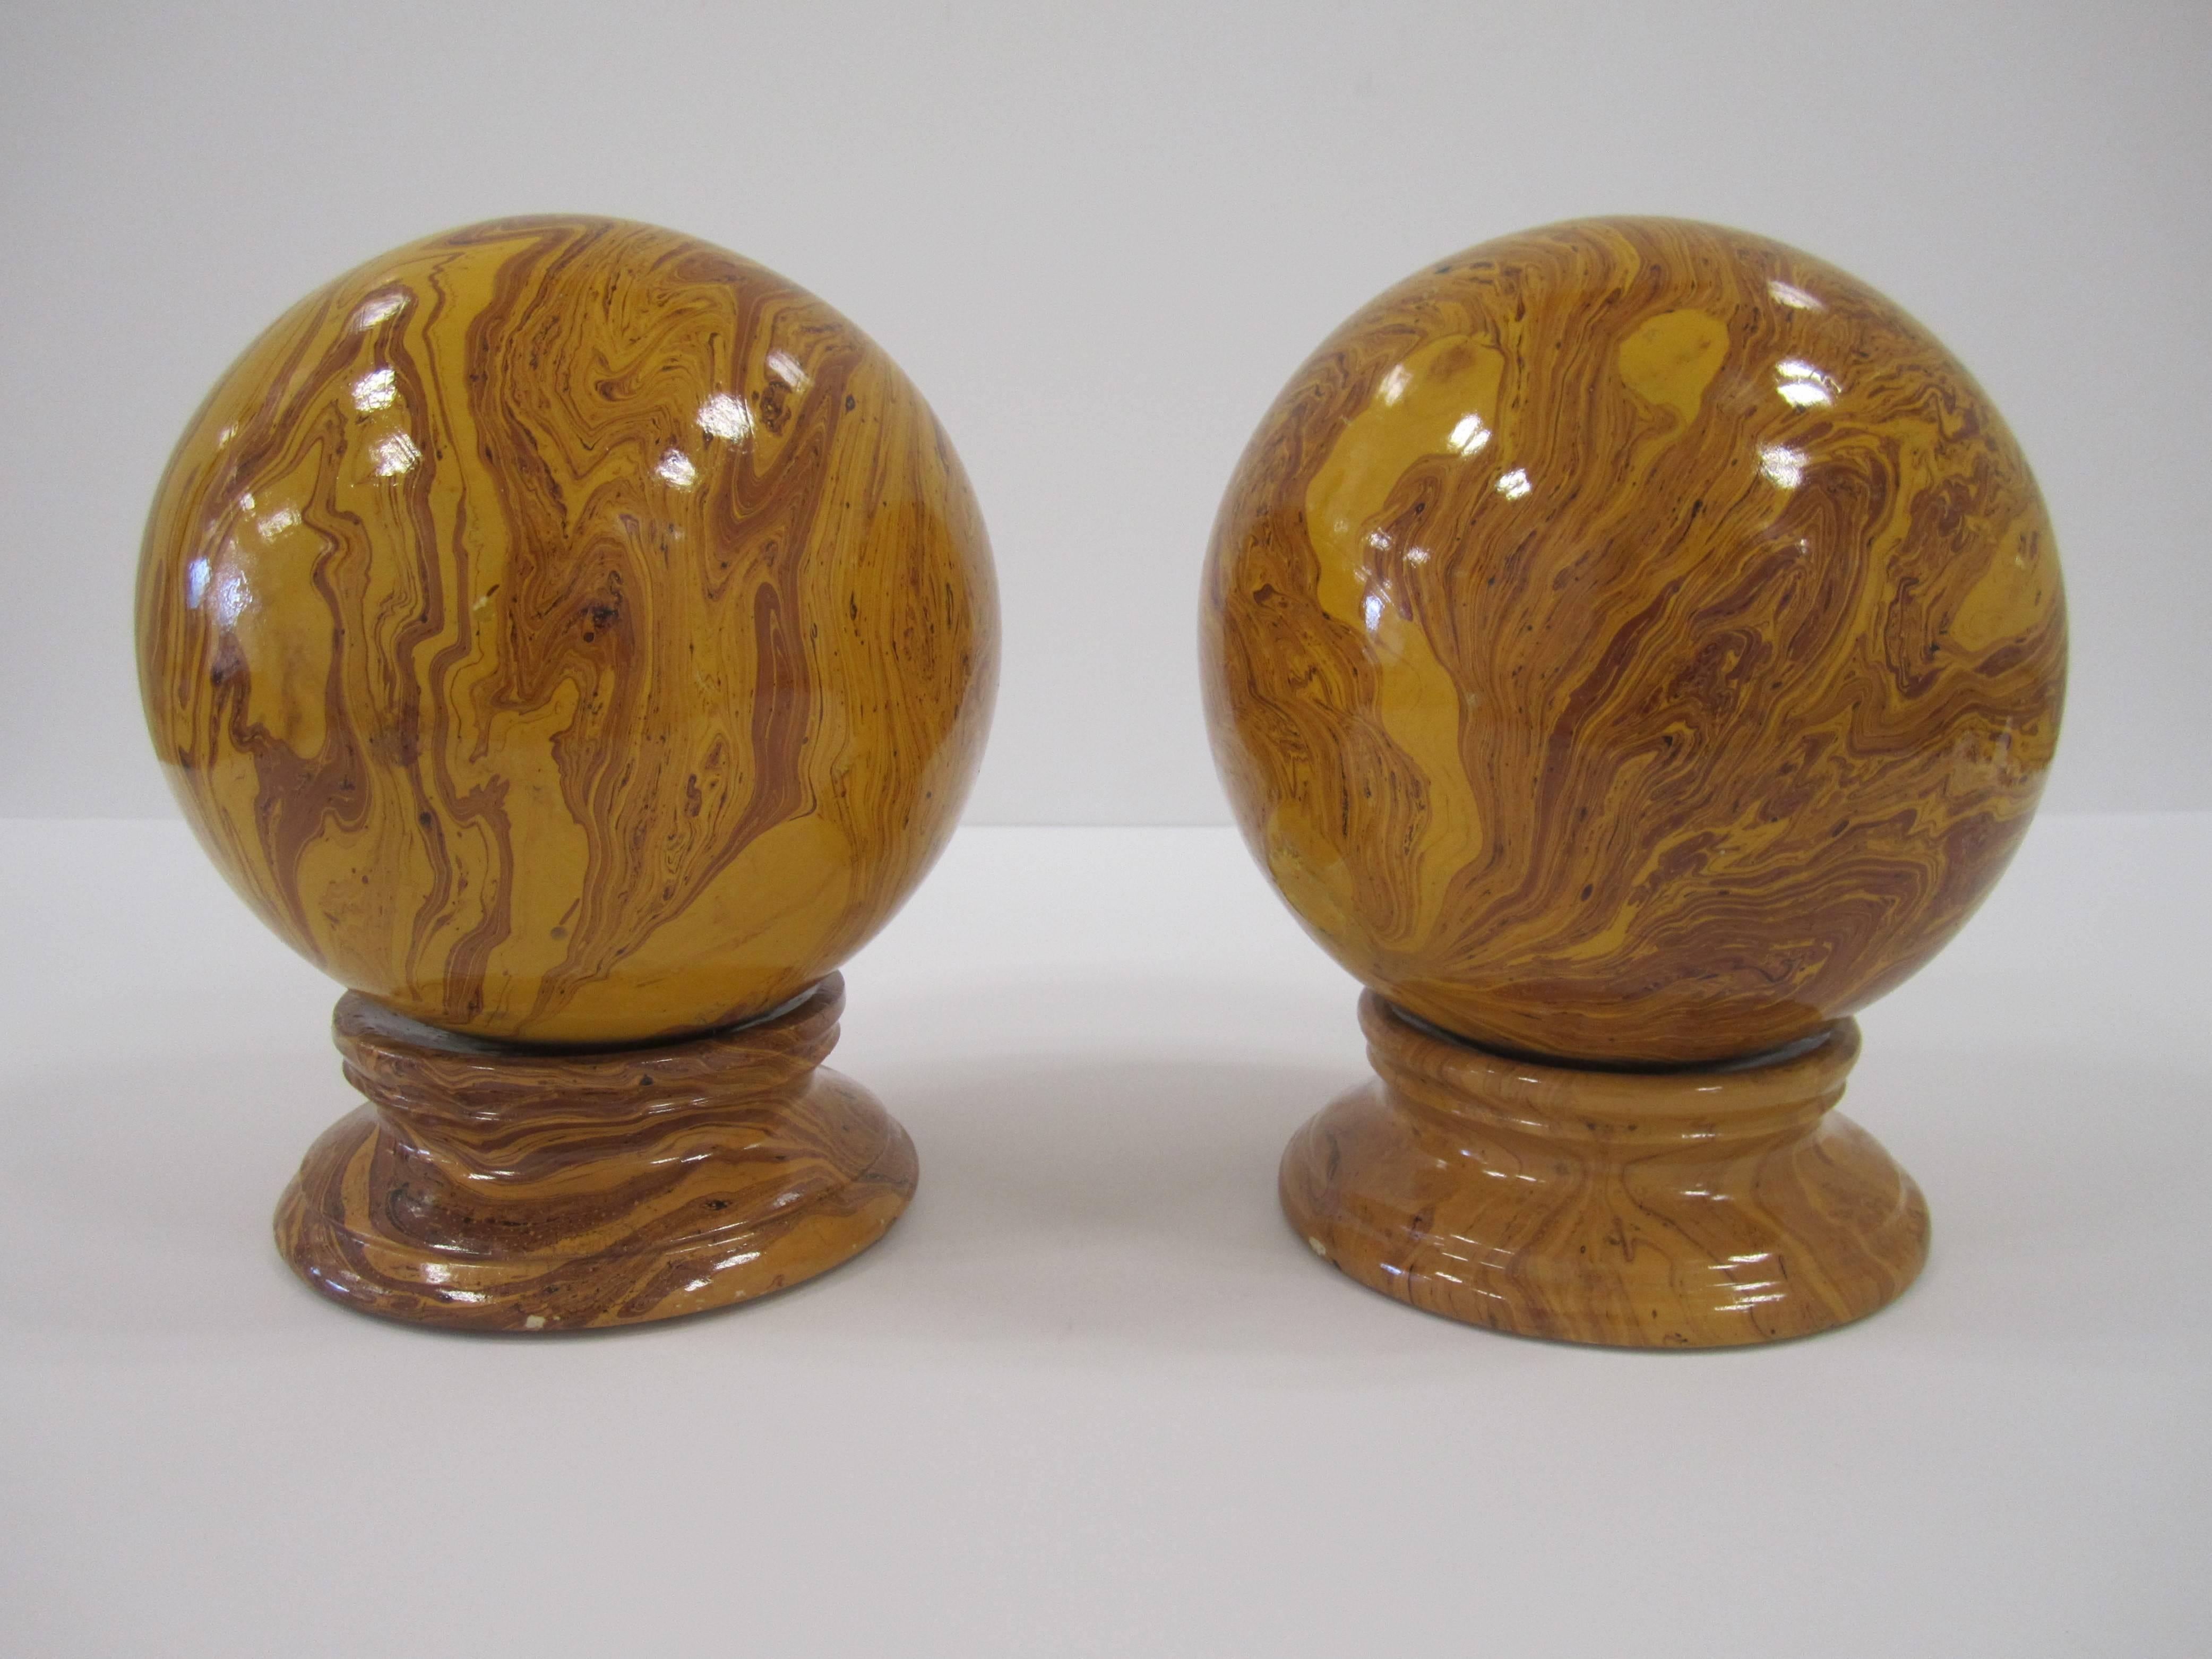 Italian Yellow Pottery Marbleized Ball Spheres Garnitures on Pedestals, Pair For Sale 1